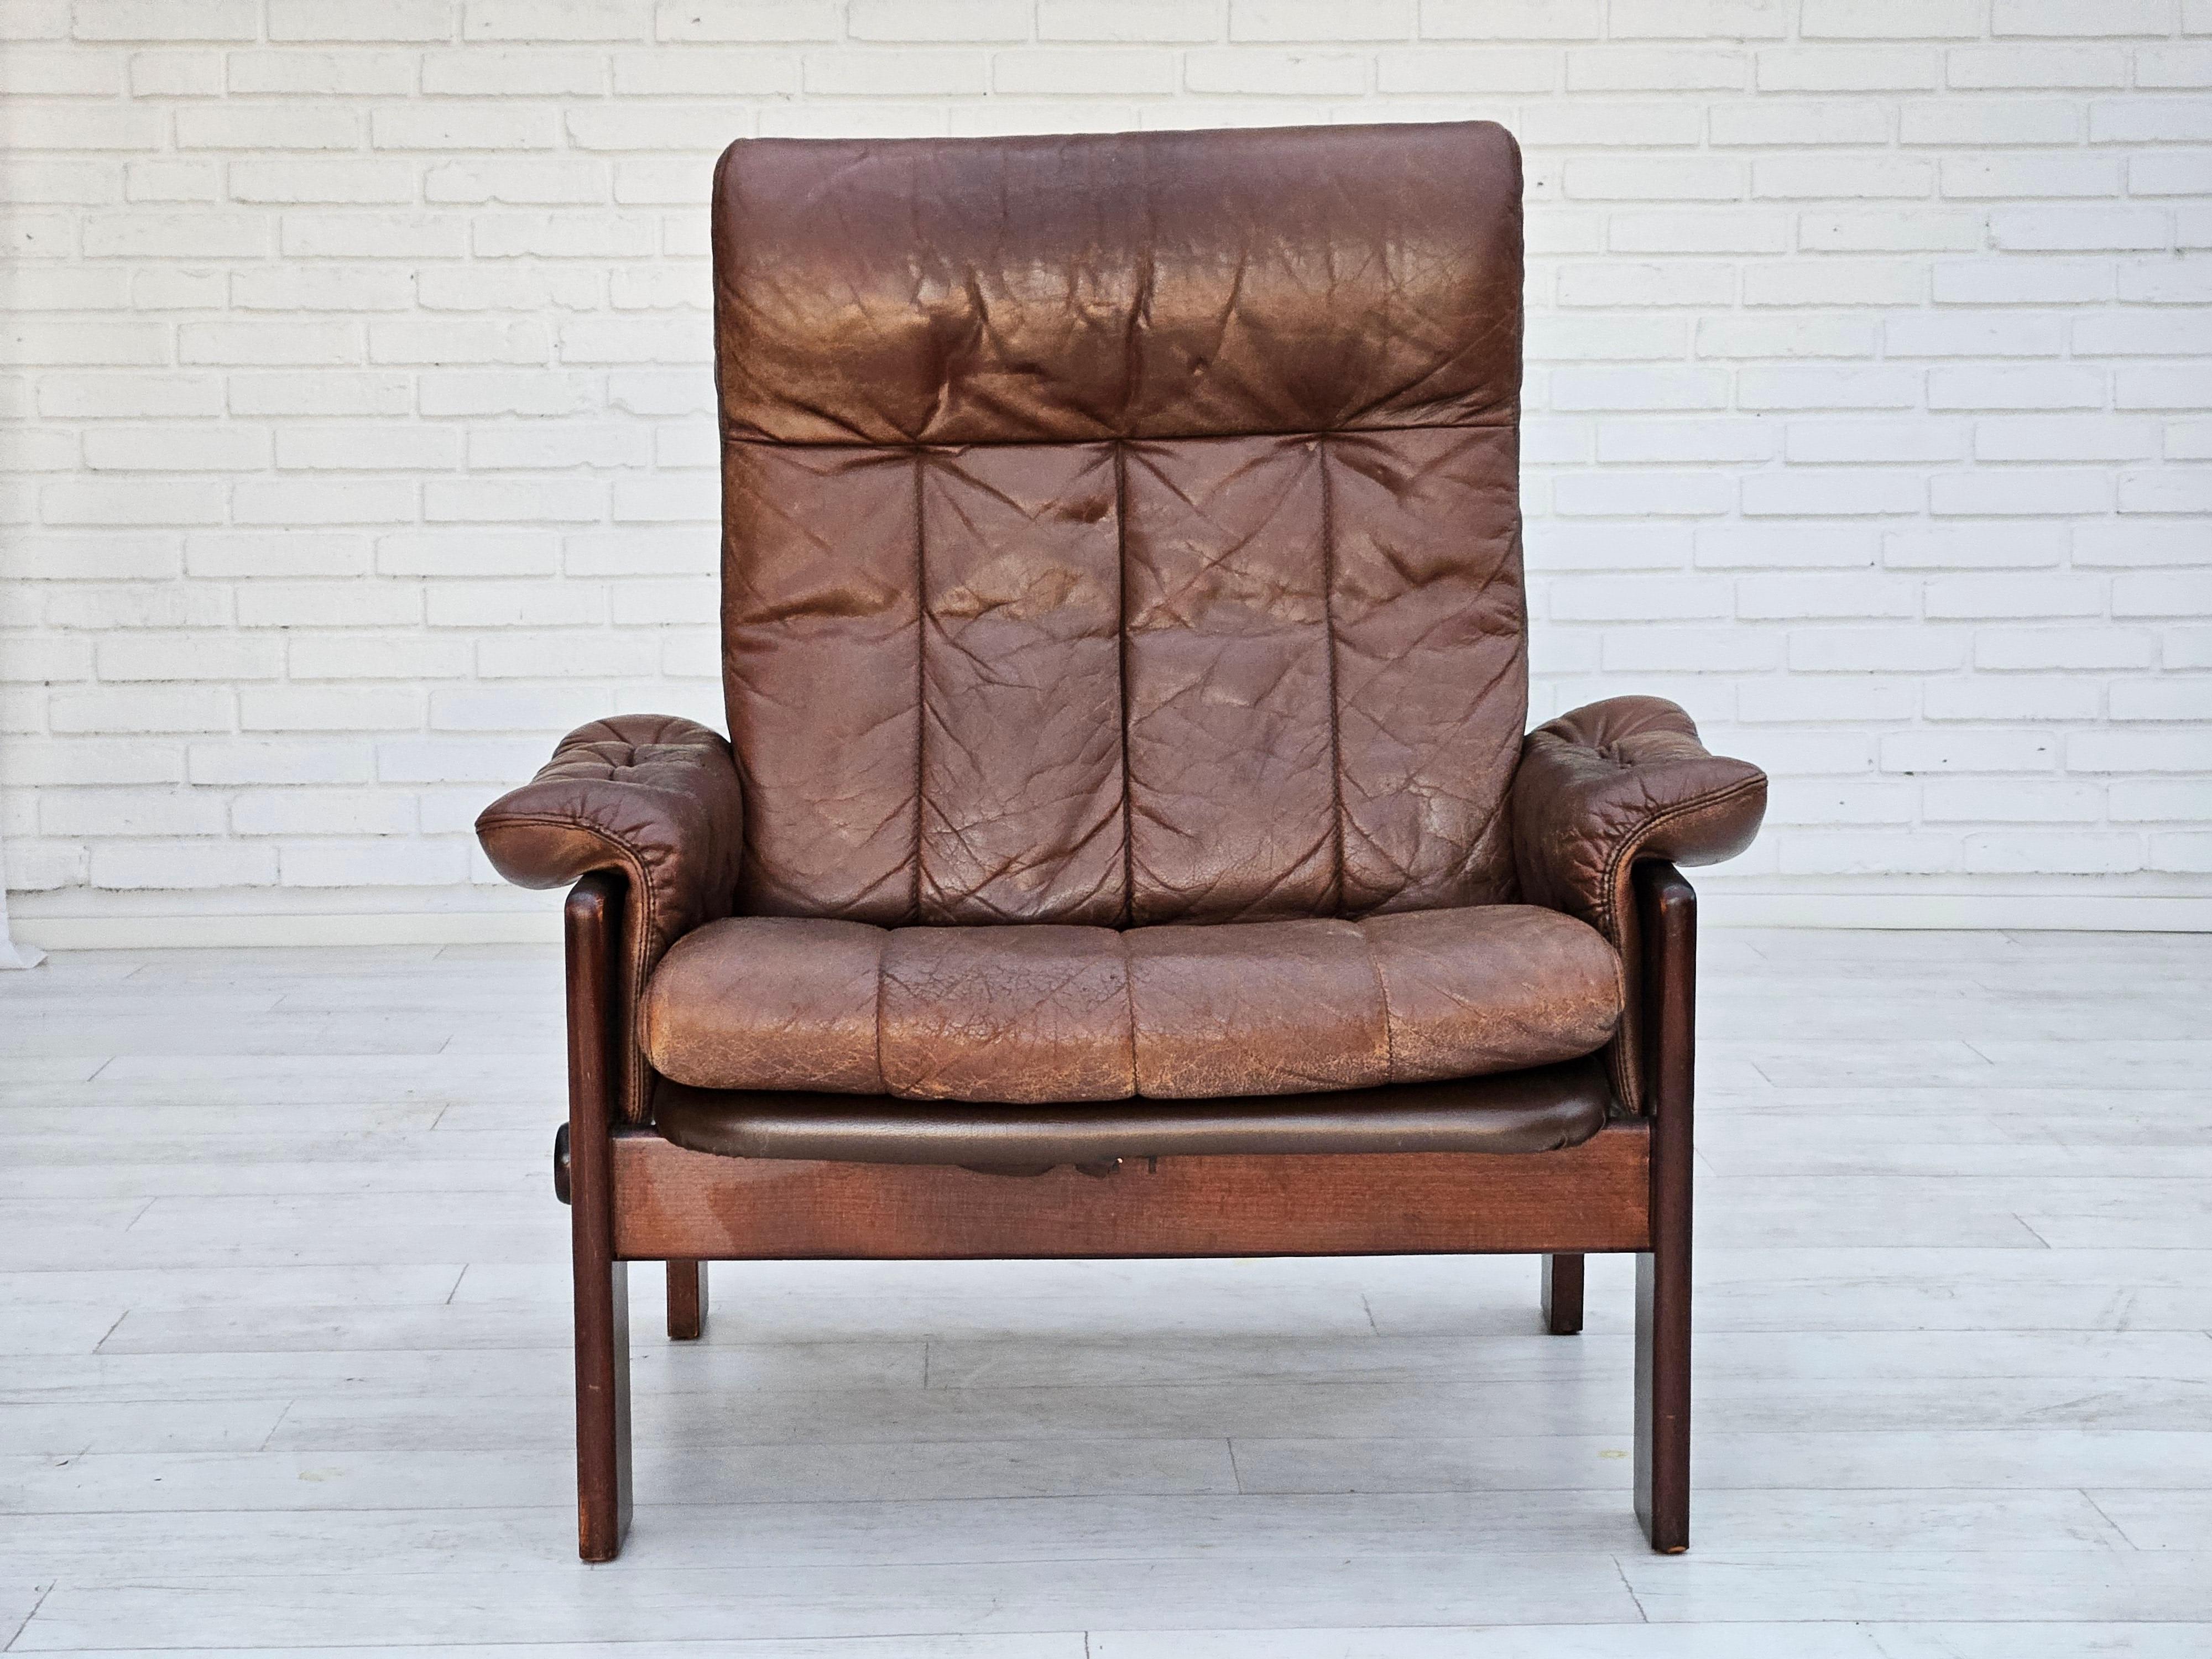 1970s, Danish lounge chair with footstool by Skippers Møbler. Original good condition: no smells and no stains. Brown leather with patina, beech wood. Adjustable seat/back.